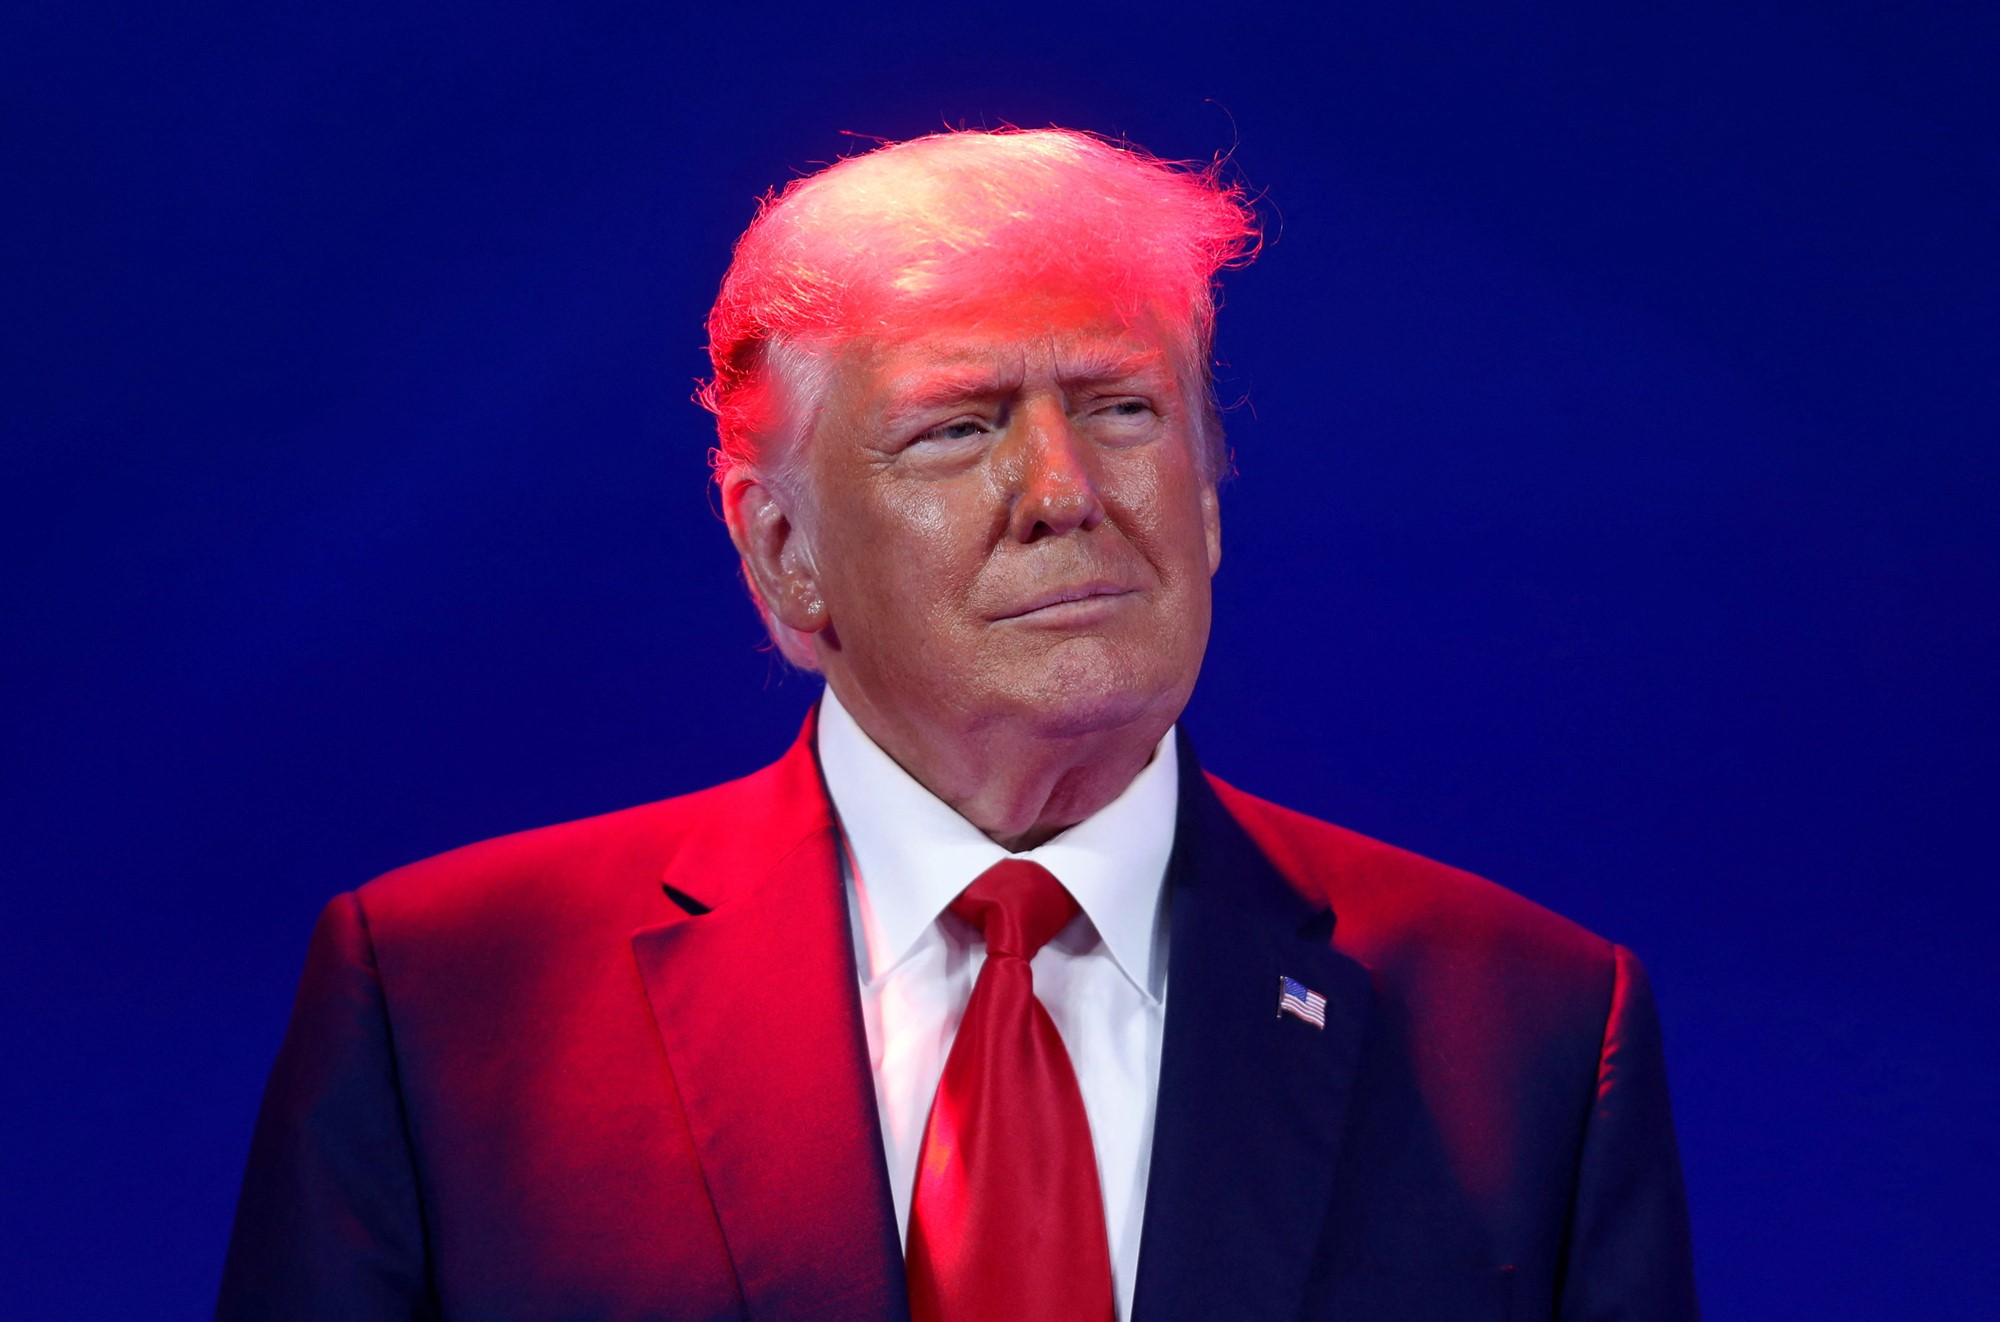 A photo of Trump smiling as he's bathed in a red light.